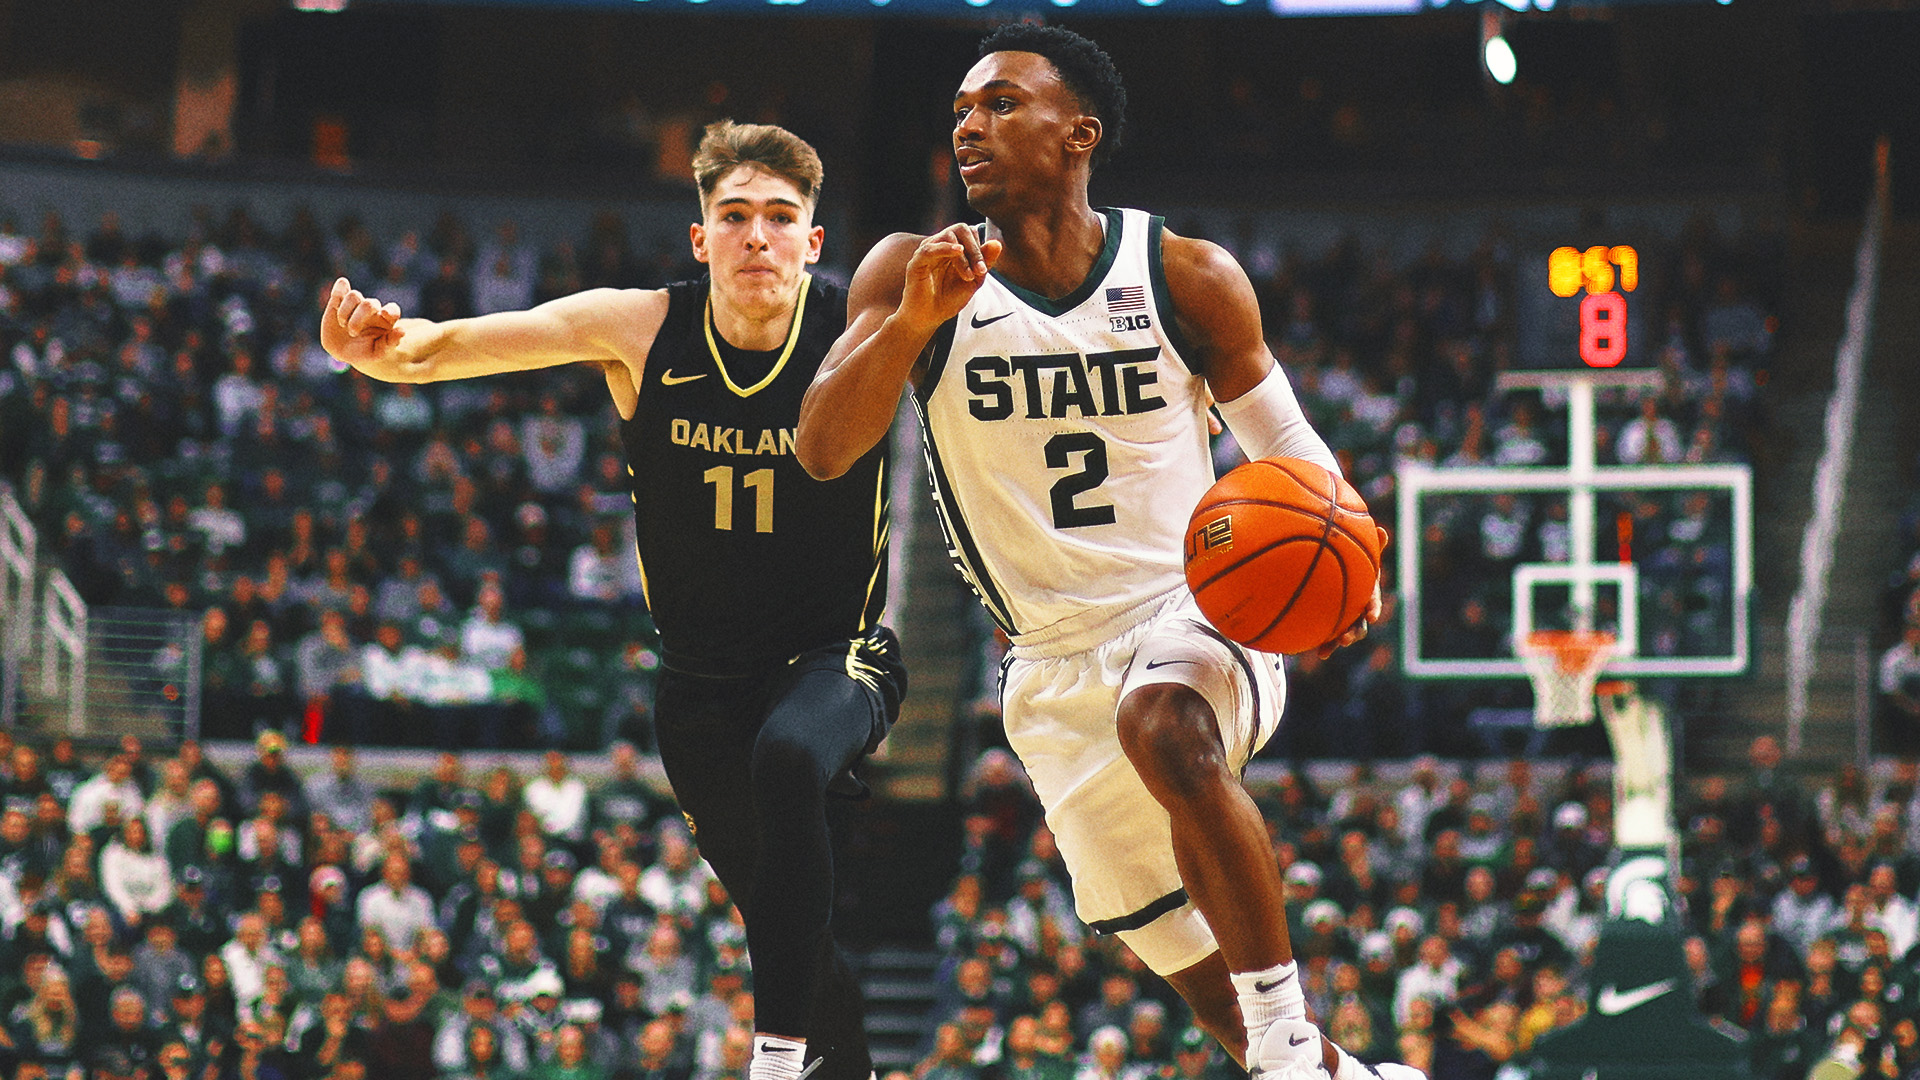 Tyson Walker tops 1,000 career points, Michigan State cruises past Oakland 79-62